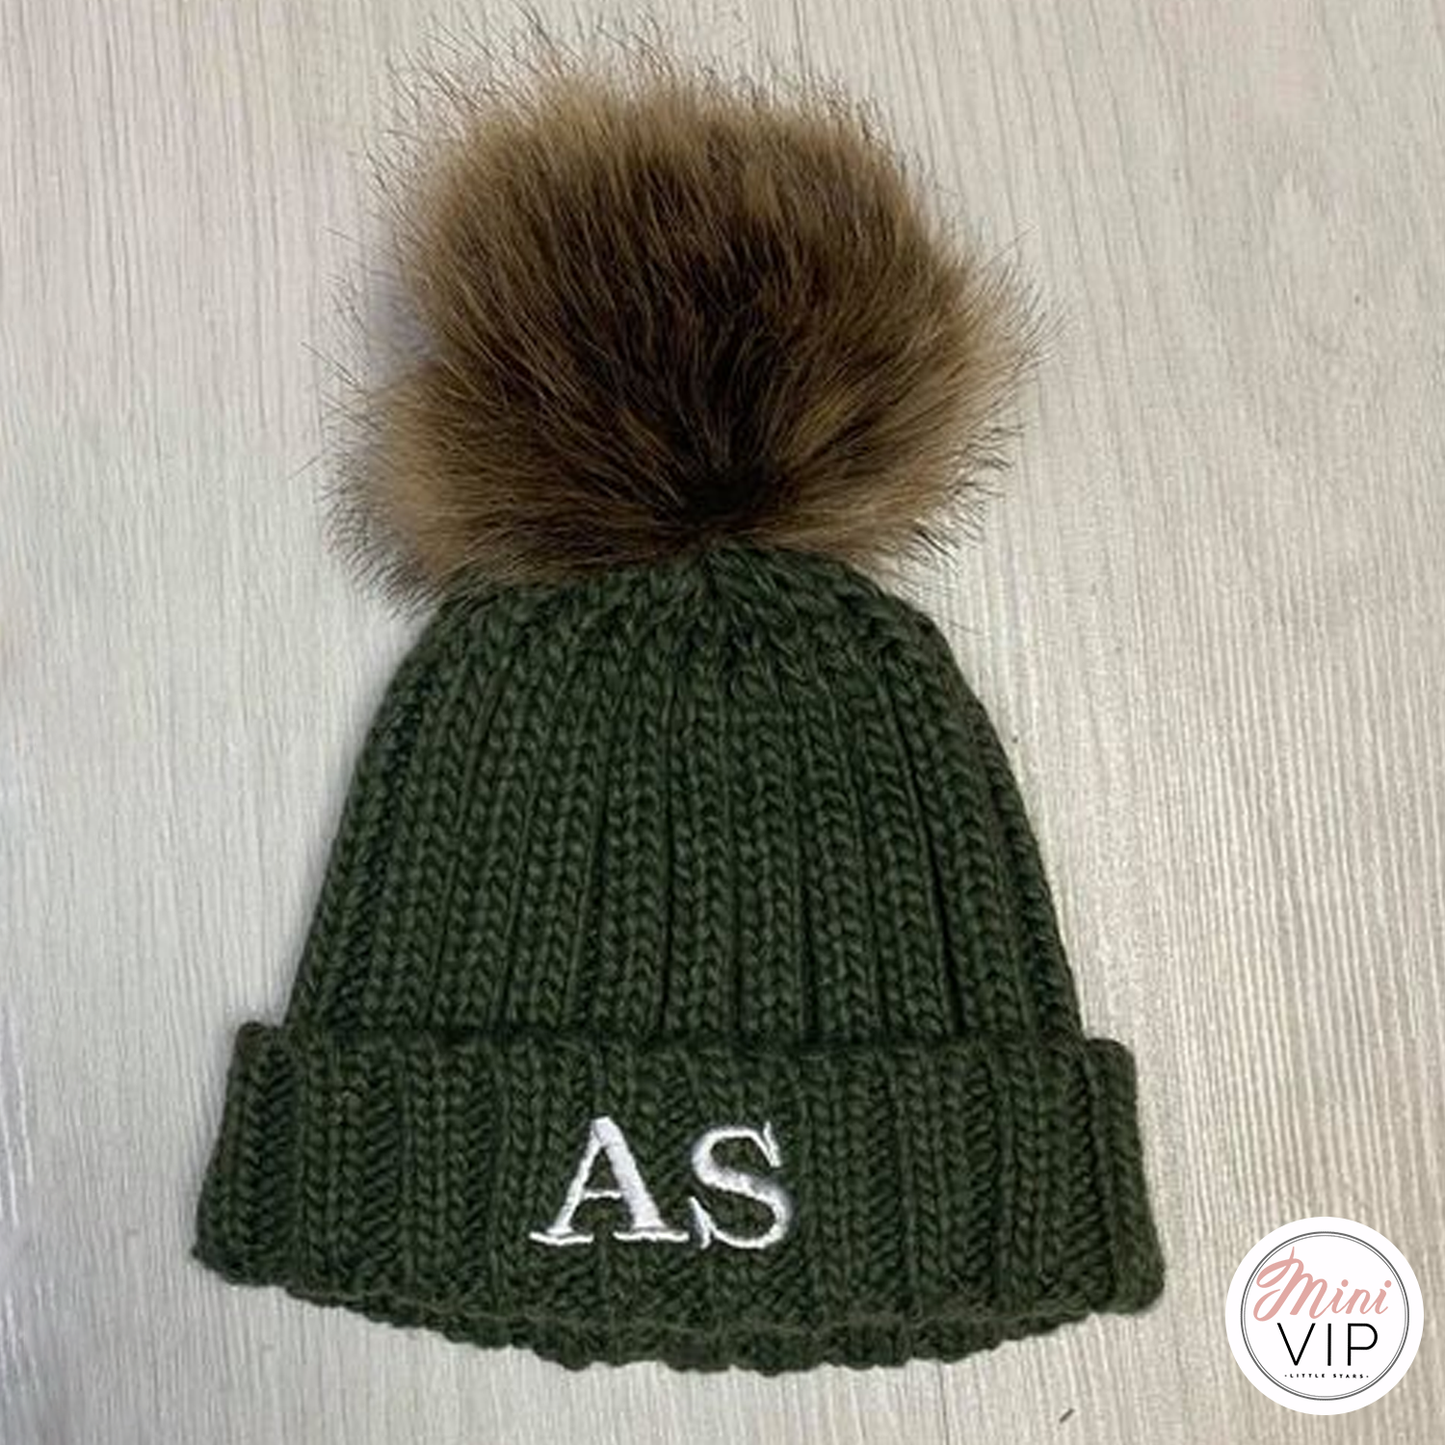 Khaki Embroidered Cable Knit Beanie Hat - Infants, Junior & Adult sizes